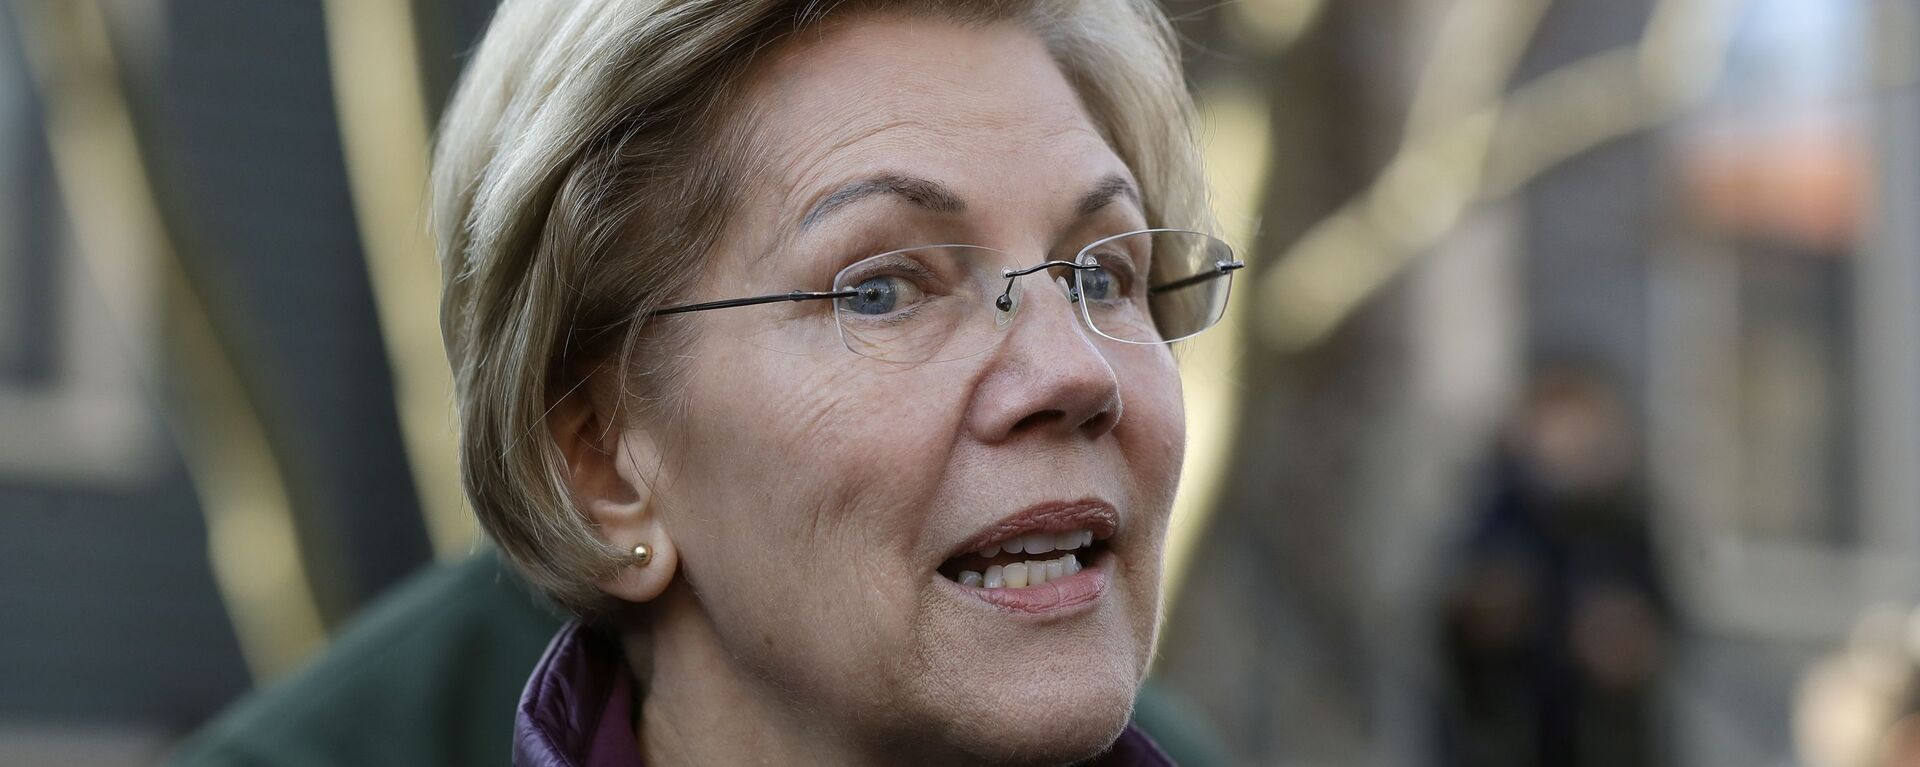 FILE - In this Thursday, March 5, 2020, file photo, Sen. Elizabeth Warren, D-Mass., speaks to the media outside her home in Cambridge, Mass., after she dropped out of the Democratic presidential race - Sputnik International, 1920, 15.08.2022